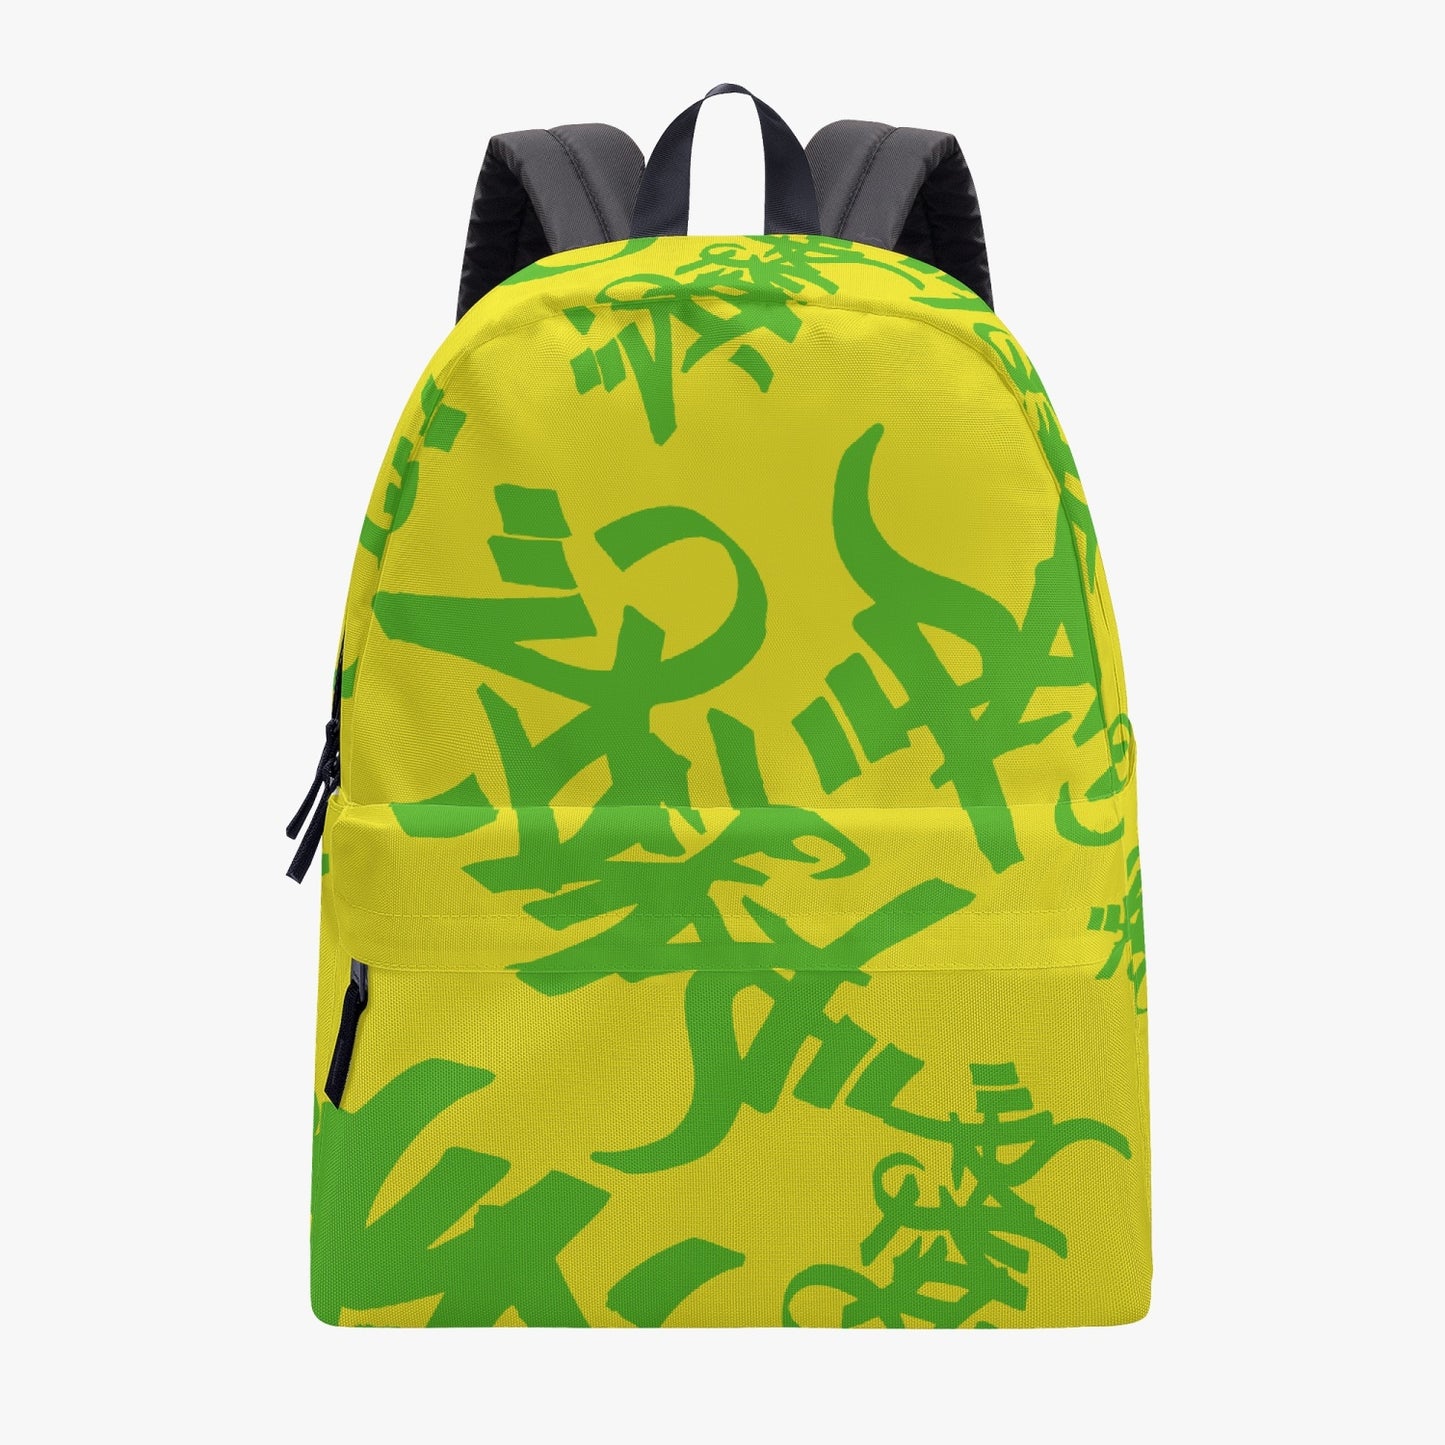 THE TAG YELLOW & GREEN CANVAS BACKPACK - Panic 39